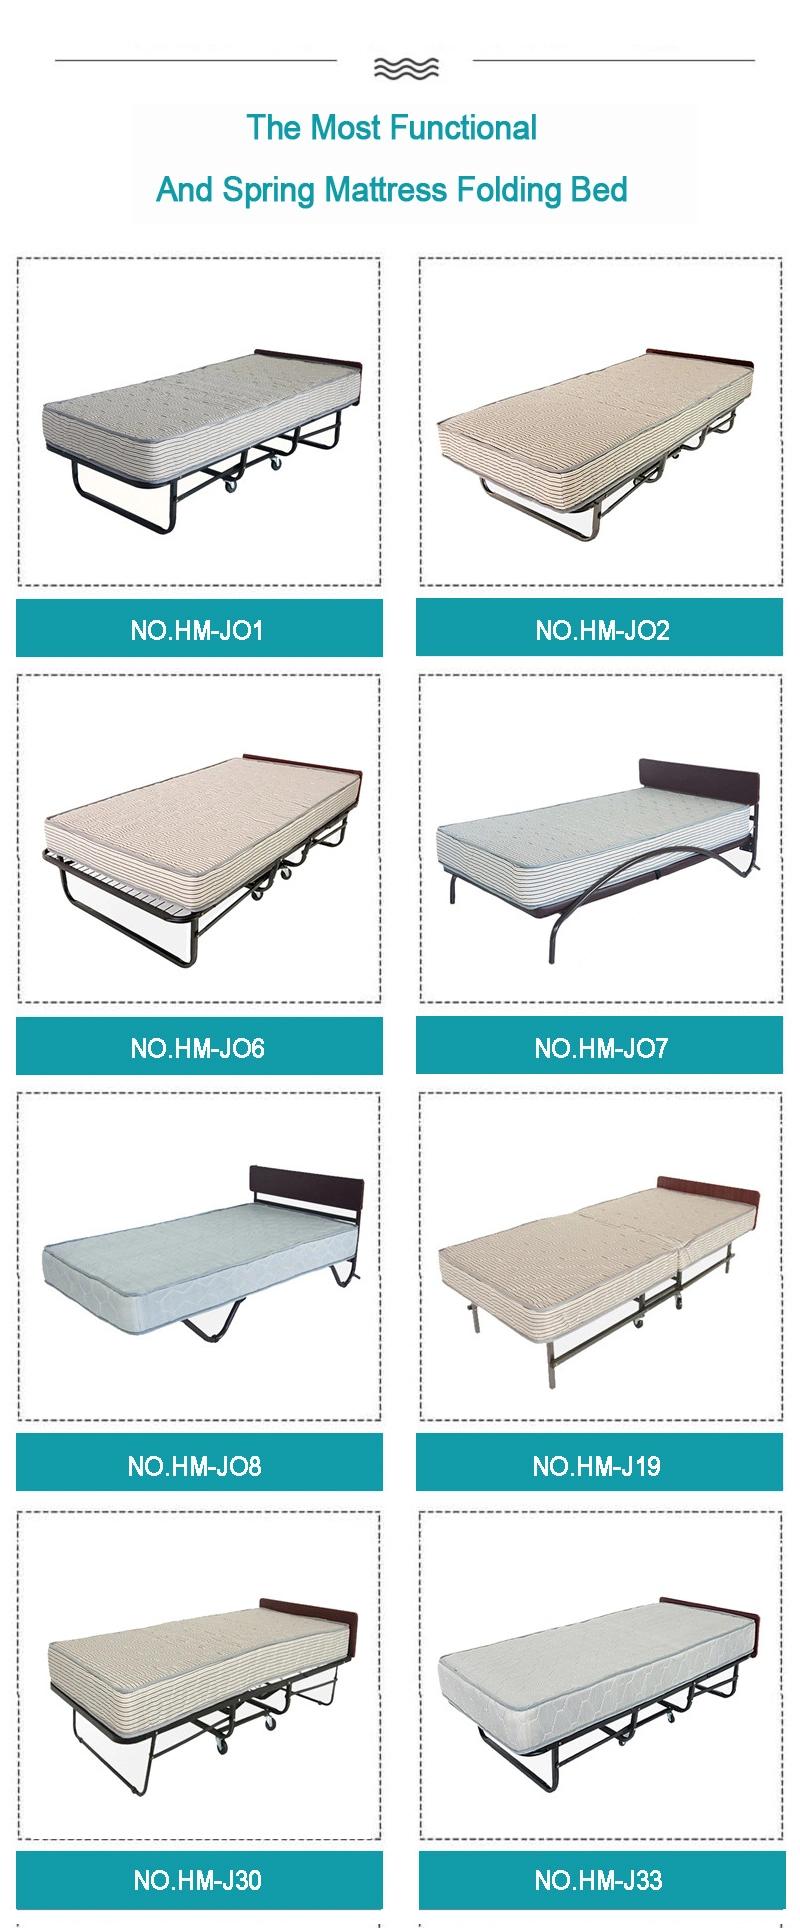 Hot Style Wholesale Folding Mattress Bed Bedroom Furniture Portable for Hotel